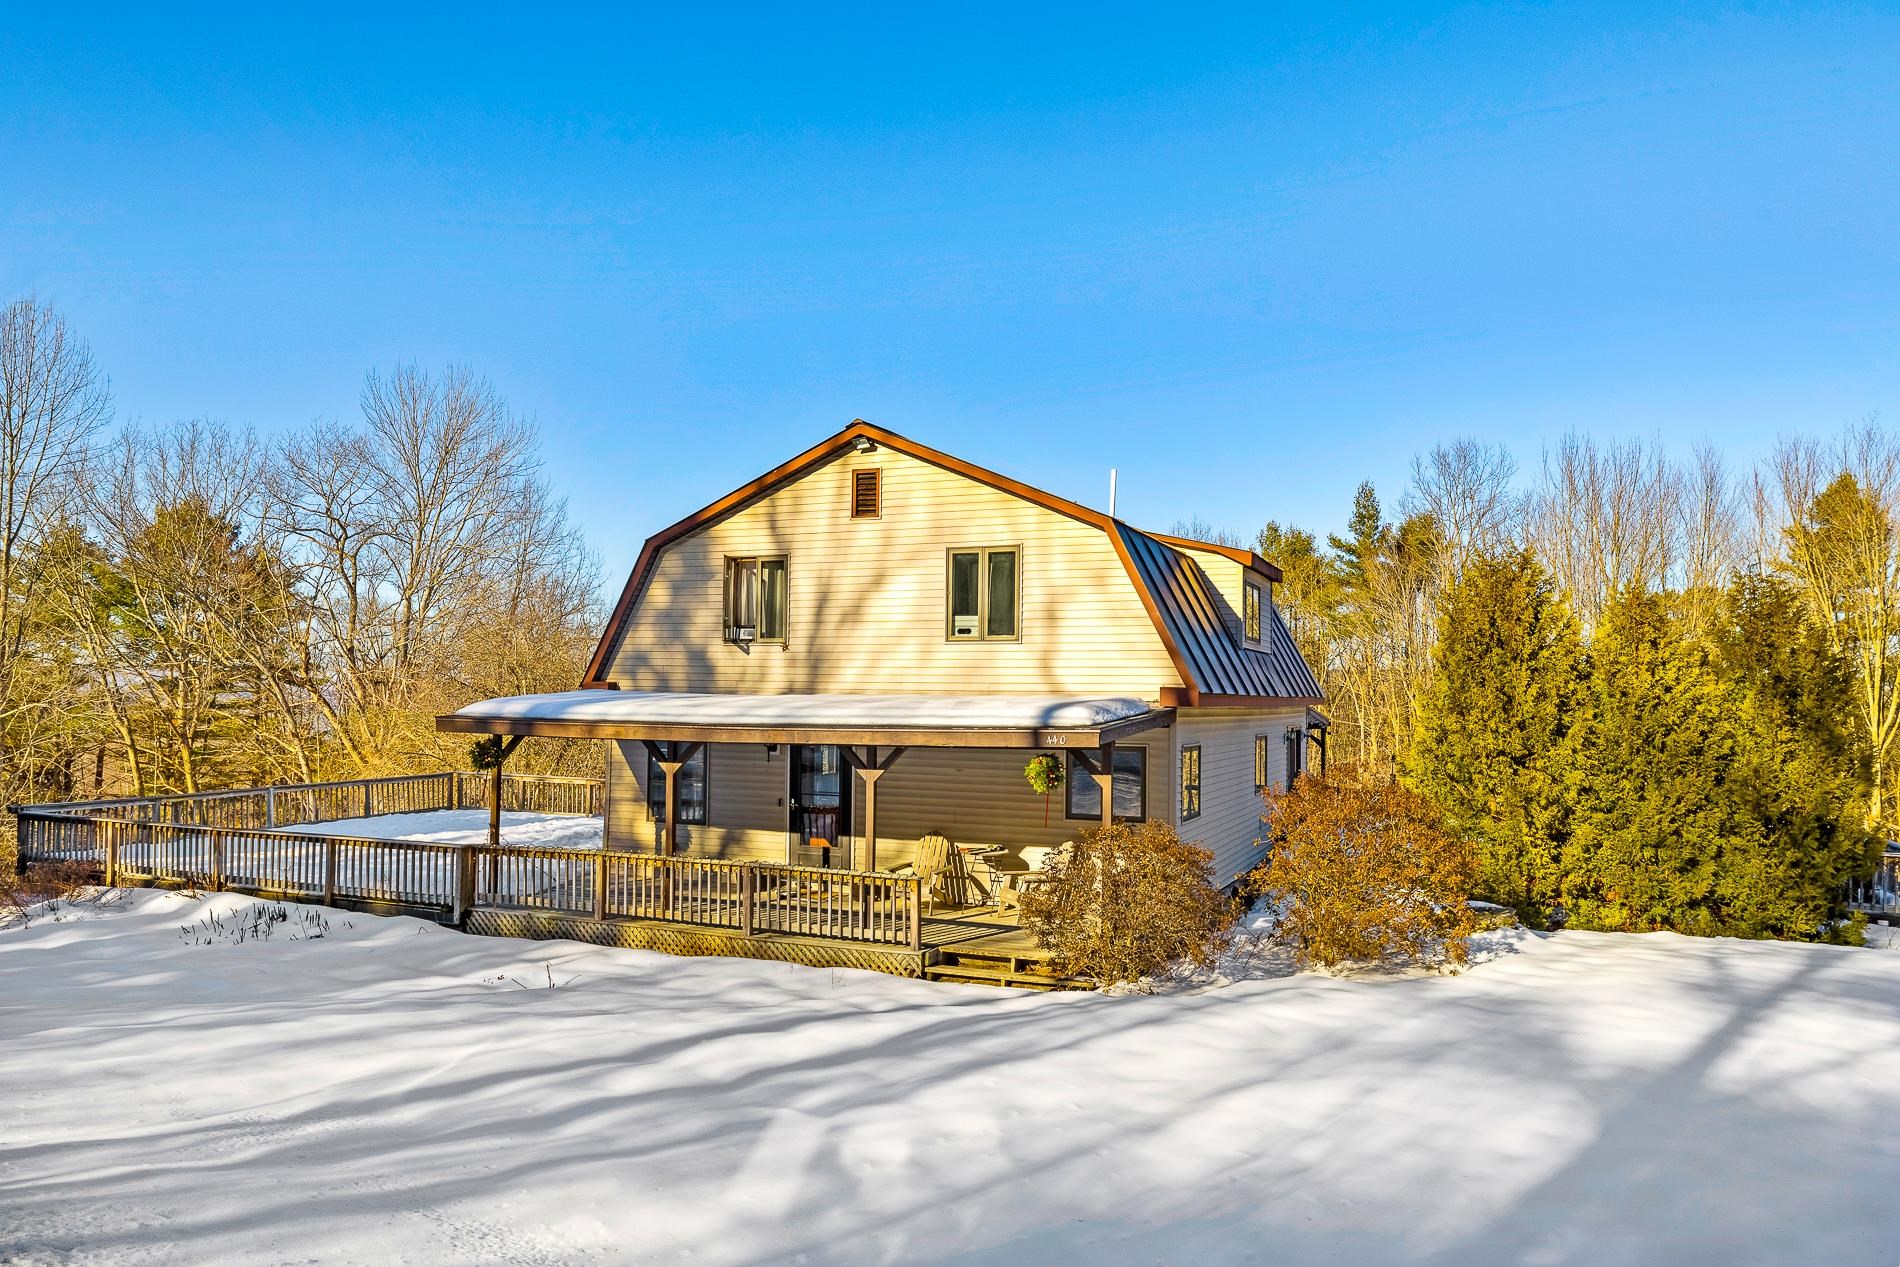 Village of White River Junction in Town of Hartford VT Home for sale $415,000 $195 per sq.ft.